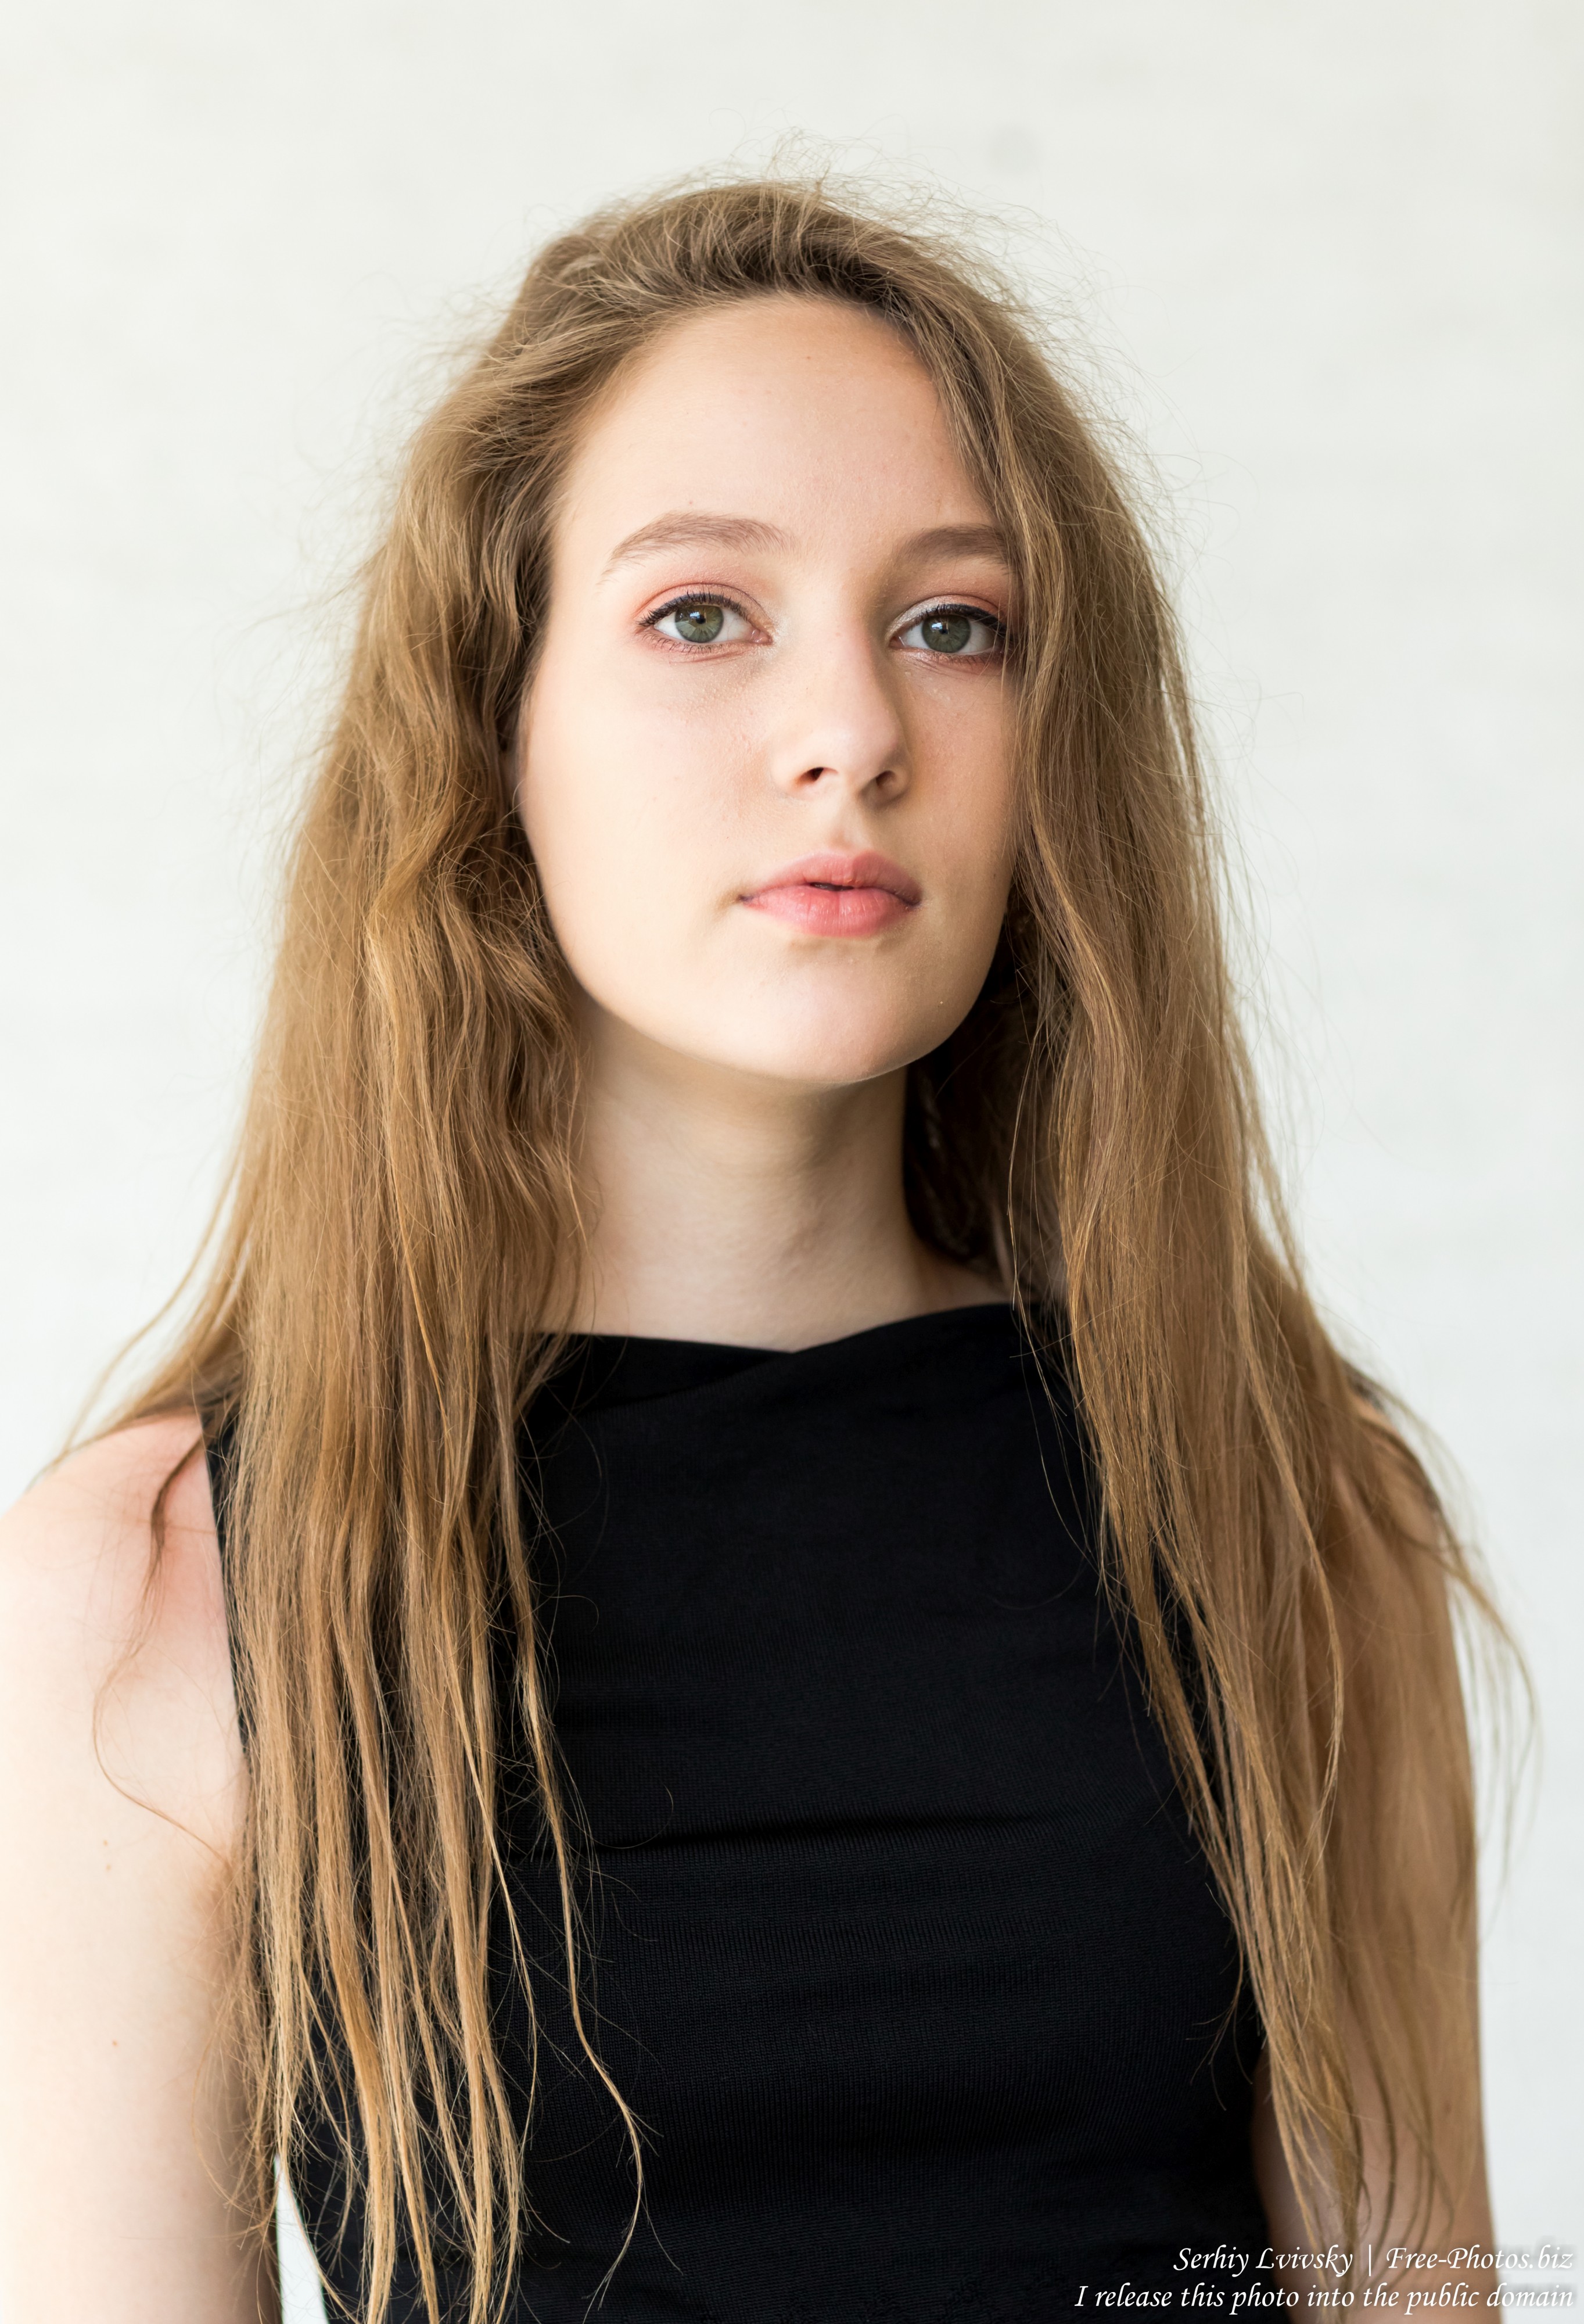 Nastia - a 16-year-old girl with natural fair hair photographed in June 2019 by Serhiy Lvivsky, picture 17